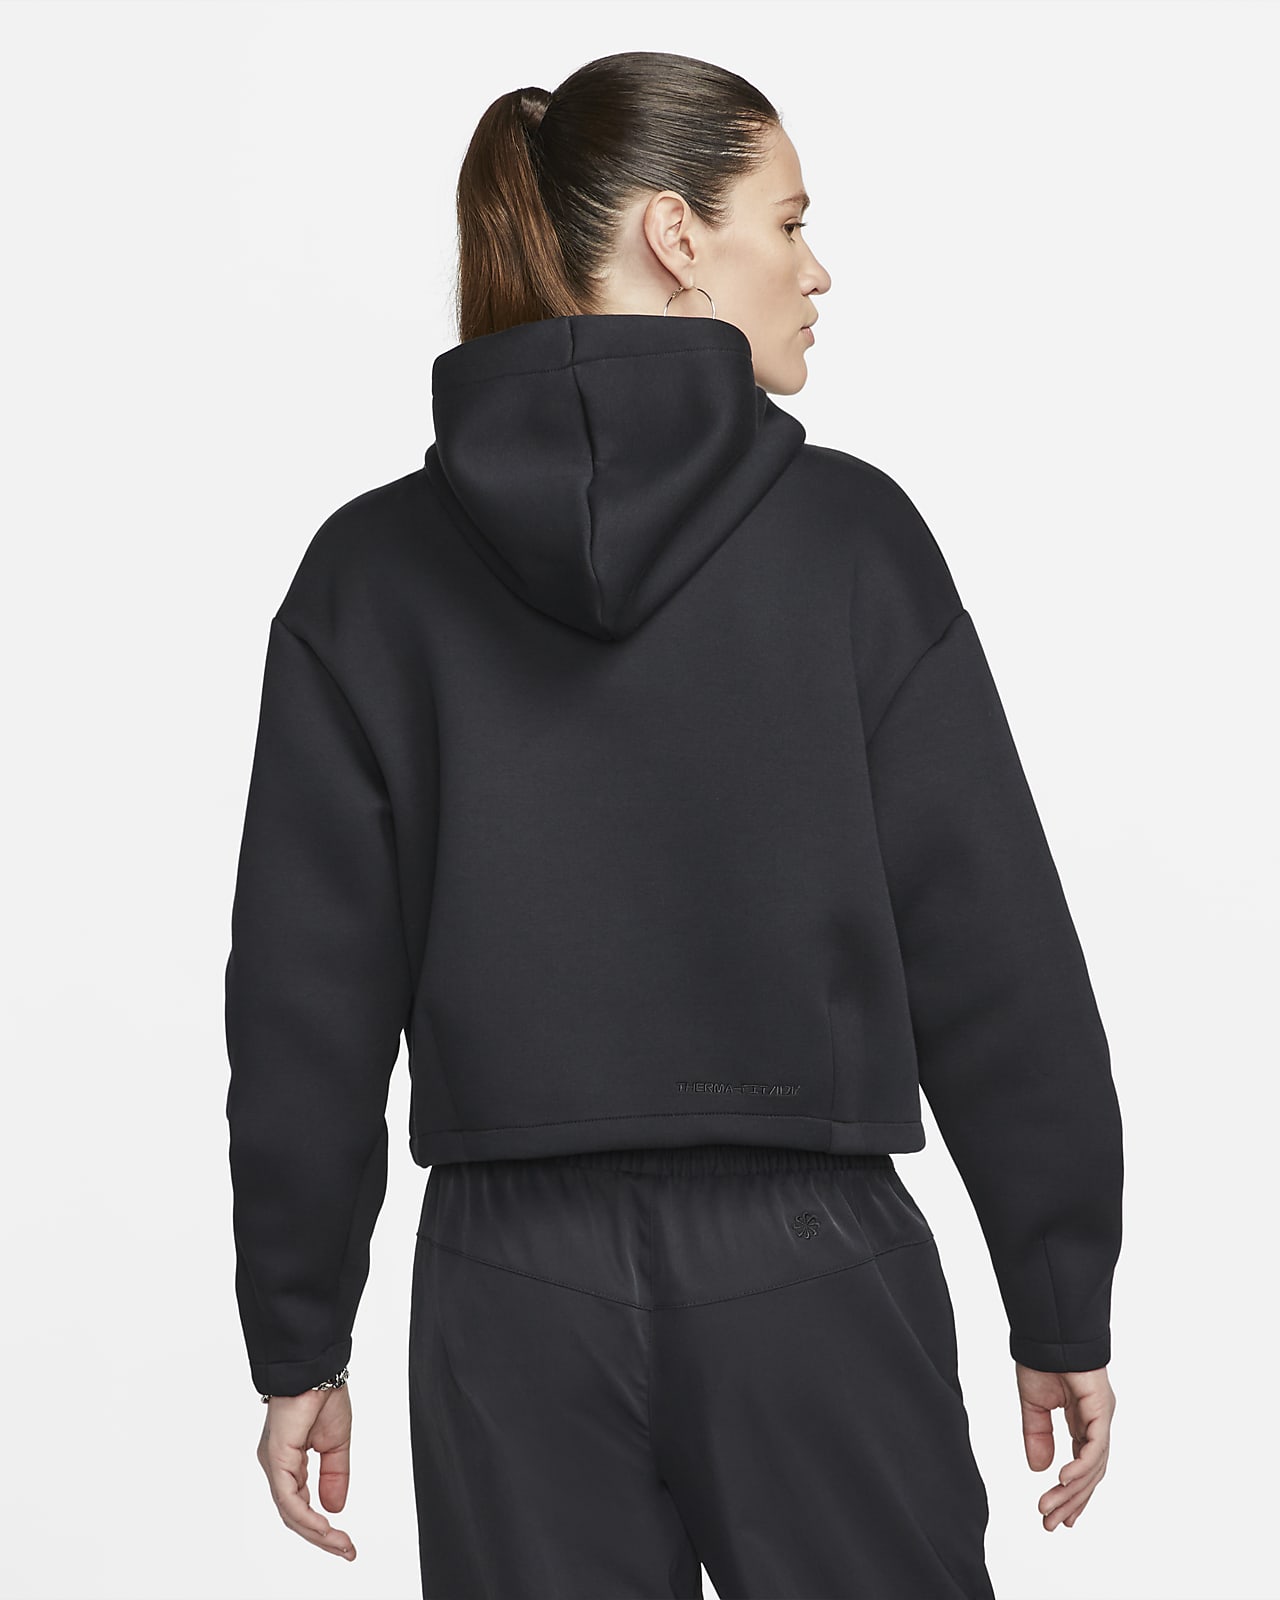 Nike Women's NWT $225 Solid Black Bungee Tech Pac Training Top Pullover